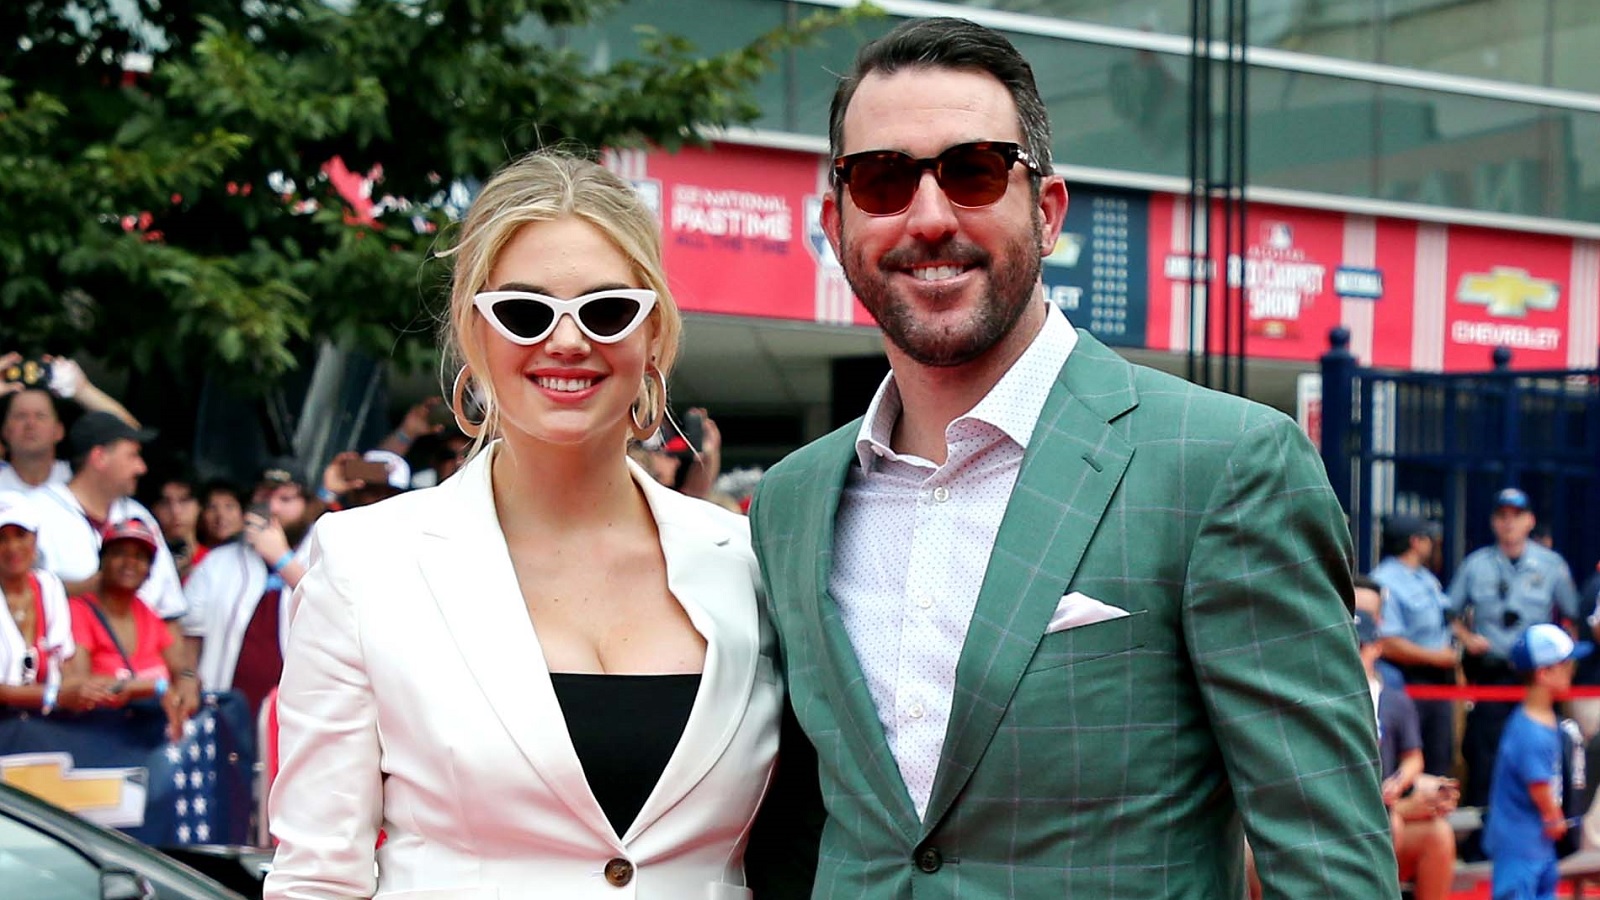 Phillies fans teased Justin Verlander with Kate Upton chants